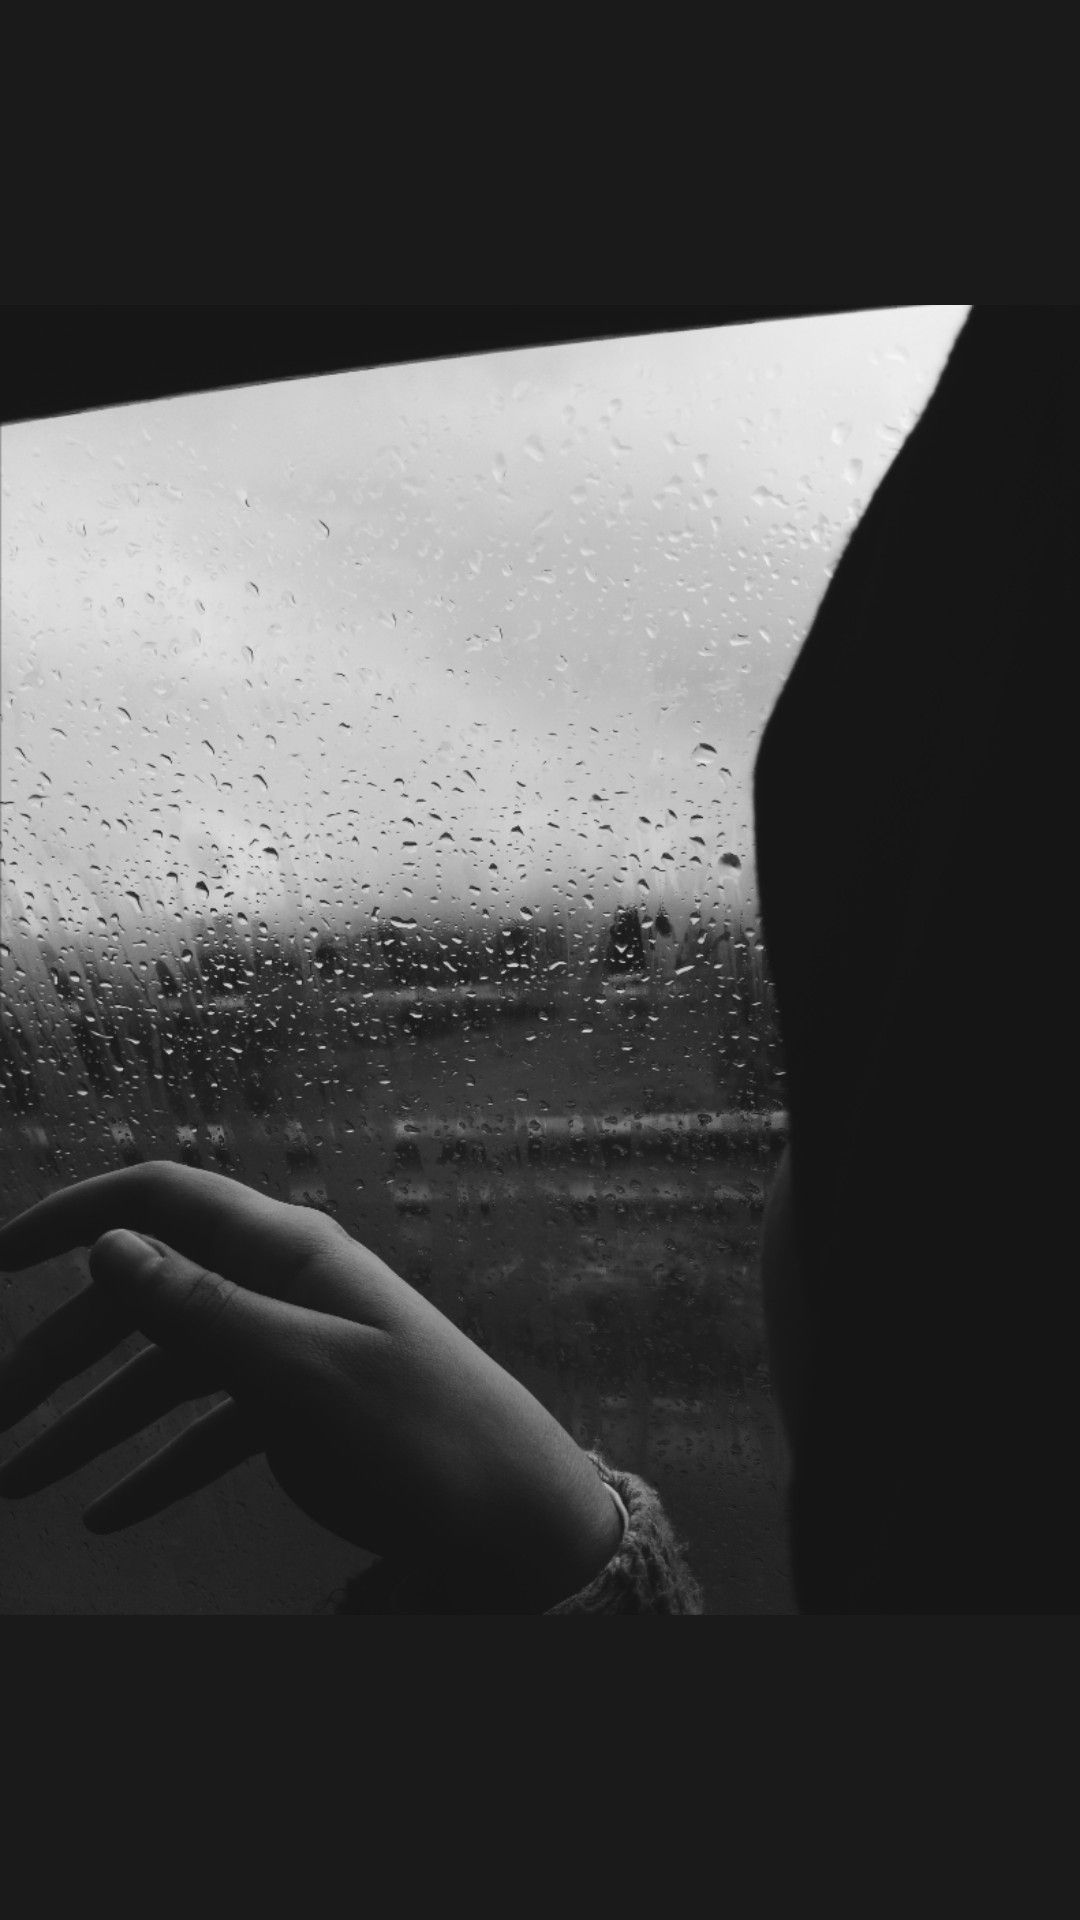 A person looking out a window with rain on it - Black and white